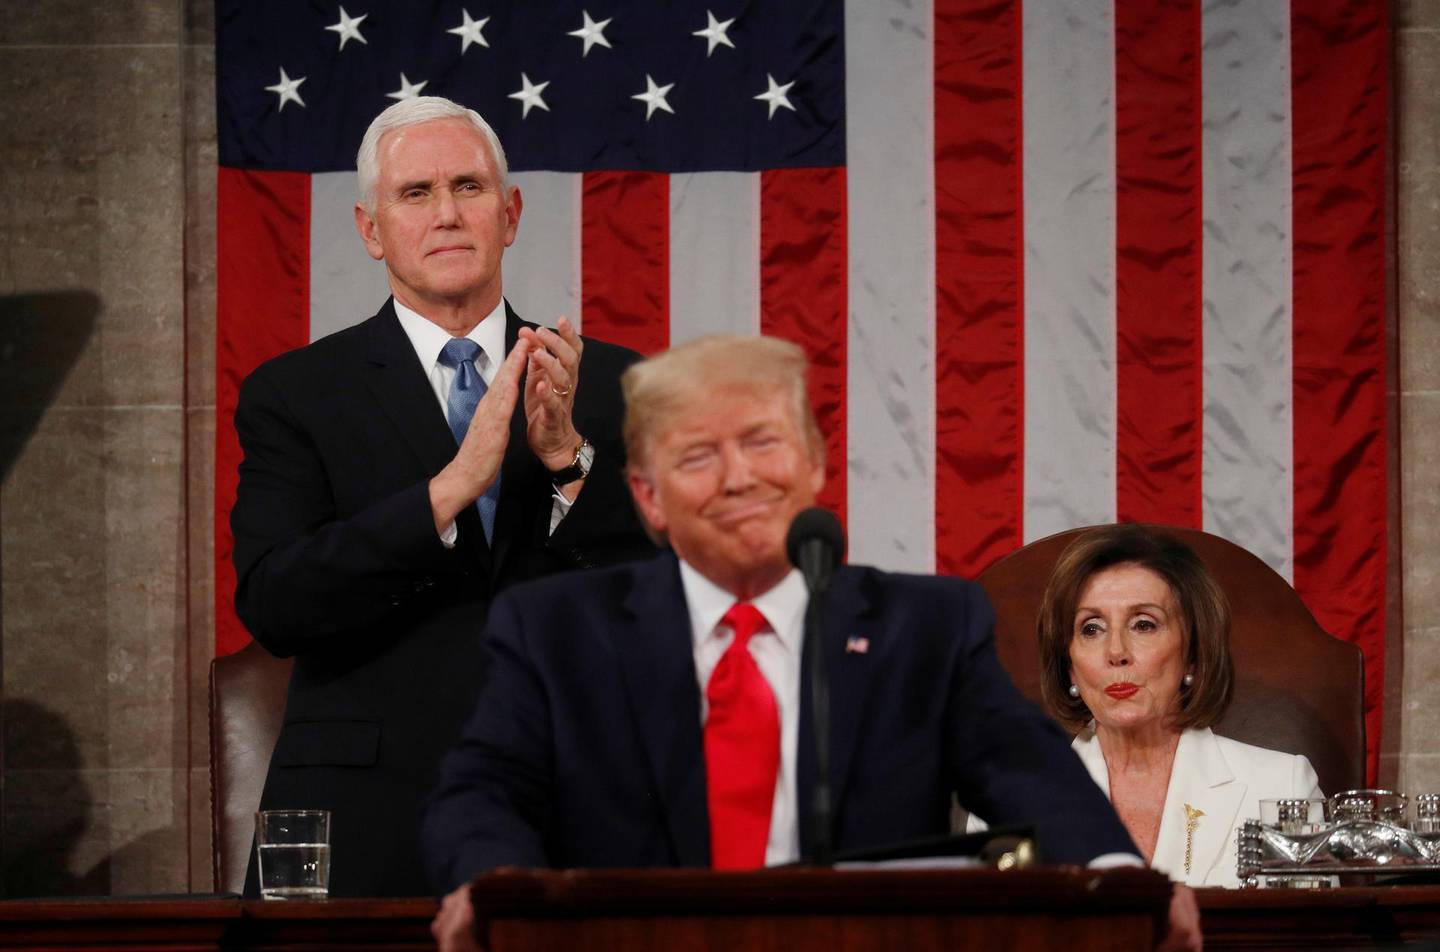 U.S. Vice President Mike Pence stands and applauds as Speaker of the House Nancy Pelosi reacts to President Donald Trump as he delivers his State of the Union address to a joint session of the U.S. Congress in the House Chamber of the U.S. Capitol in Washington, U.S. February 4, 2020. REUTERS/Leah Millis/POOL     TPX IMAGES OF THE DAY